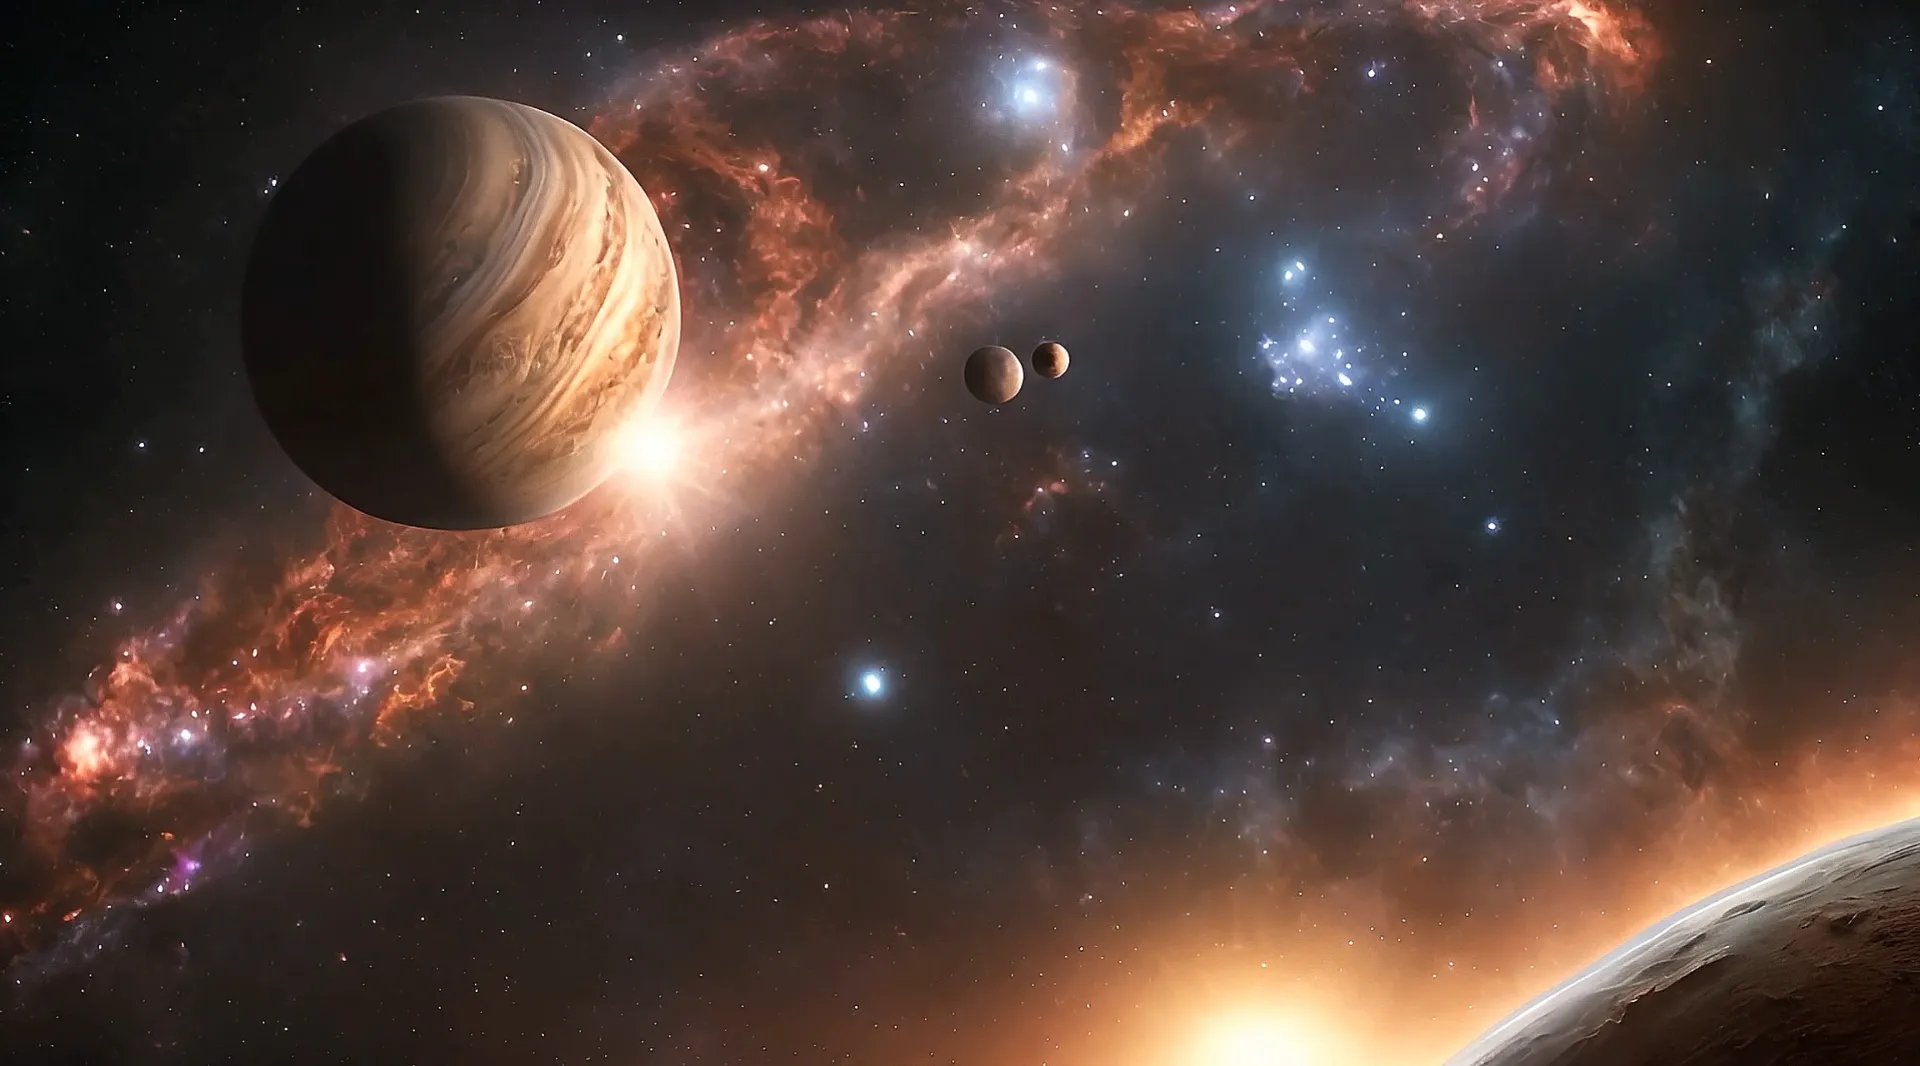 Epic Space Odyssey with Planets and Star Nebula Video